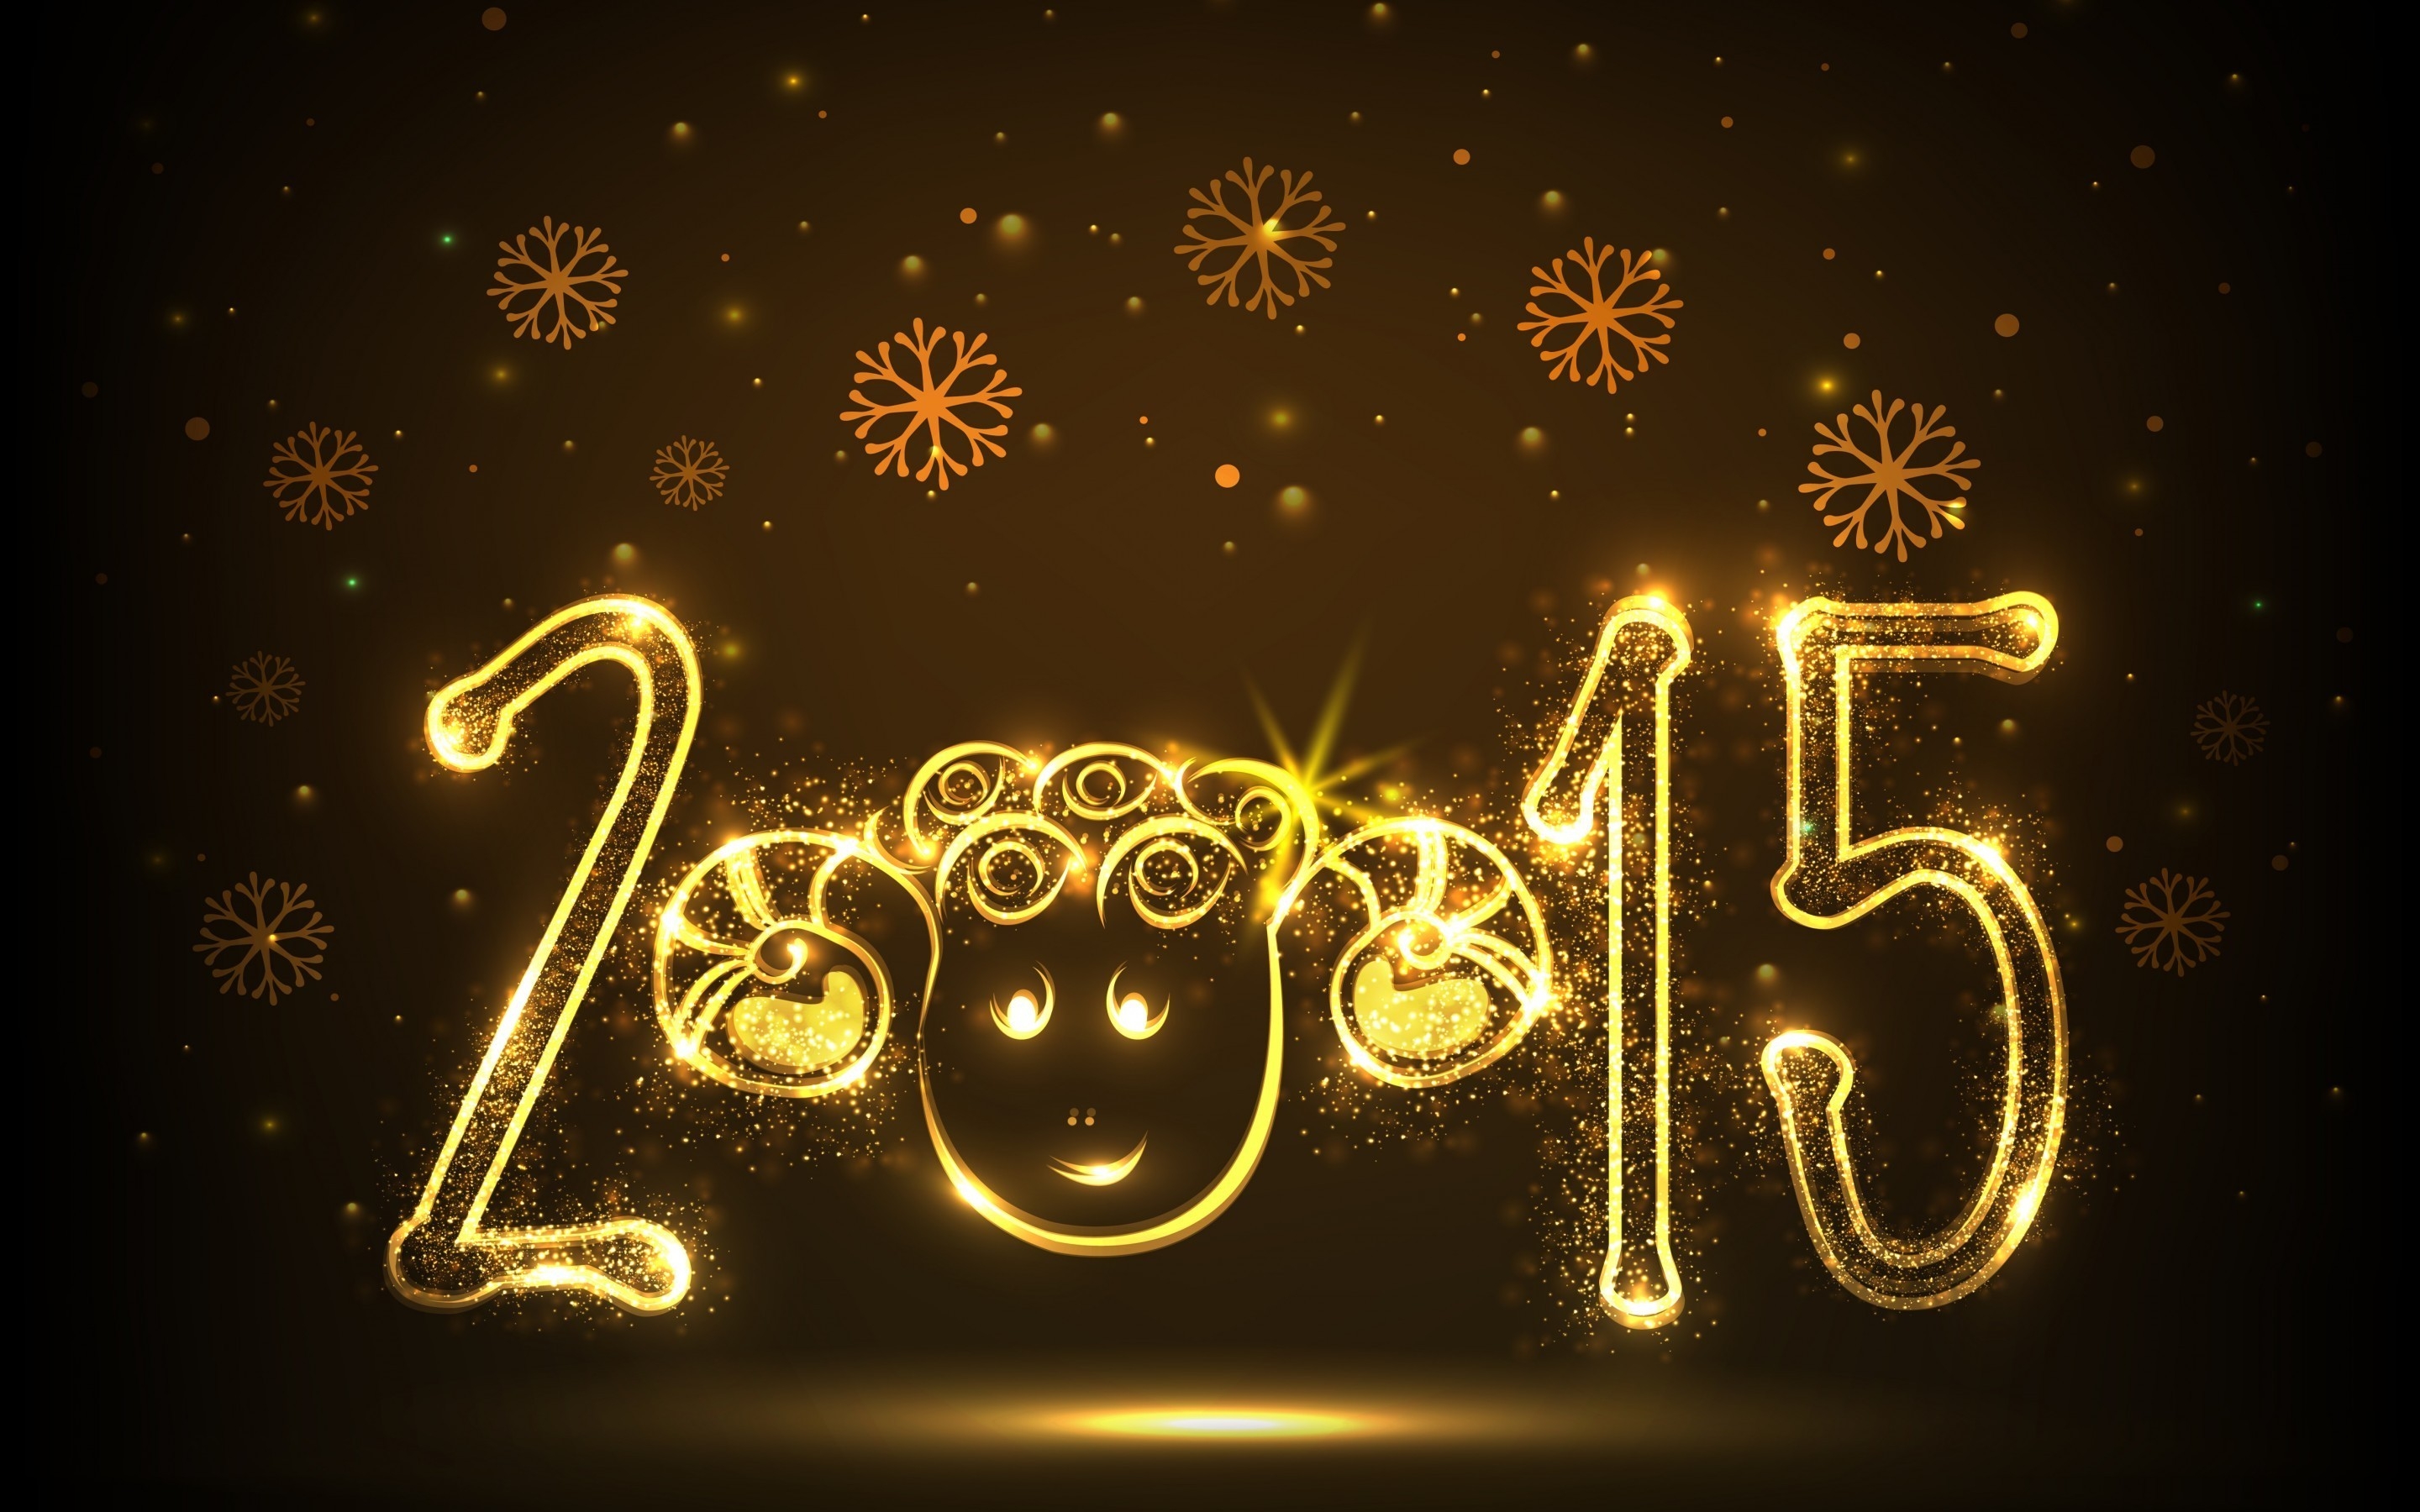 New Year Funny Face for 2880 x 1800 Retina Display resolution